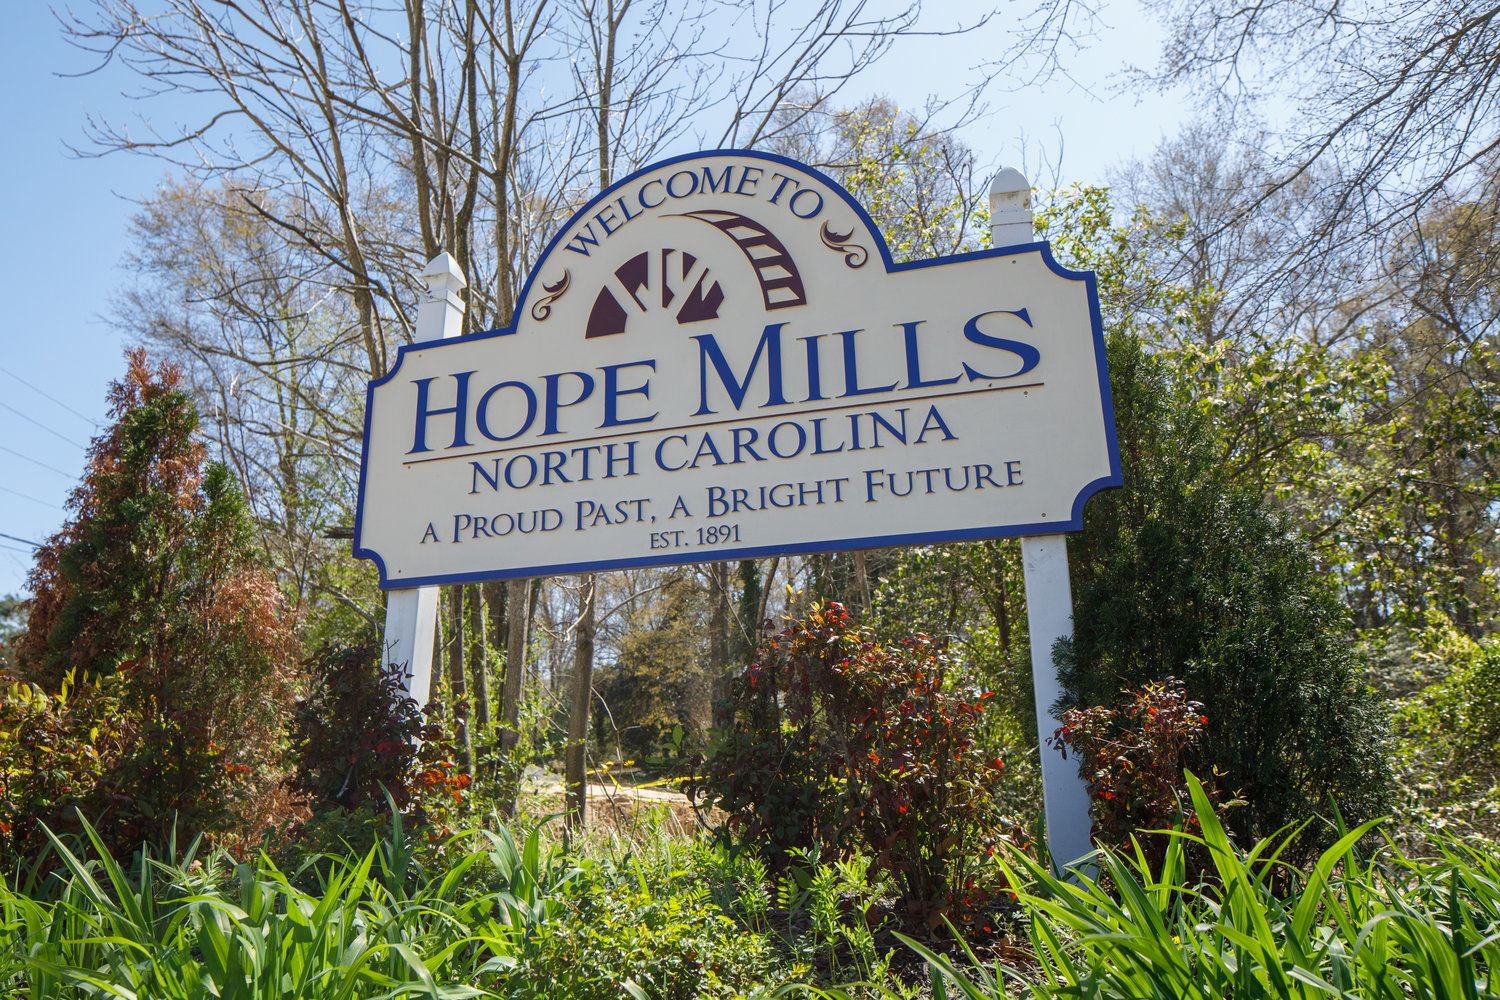 The deadline to reserve a spot at the Mill Village Celebration luncheon in Hope Mills is Oct. 23. Email millvillagehm@gmail.com or call 910-578-5258.